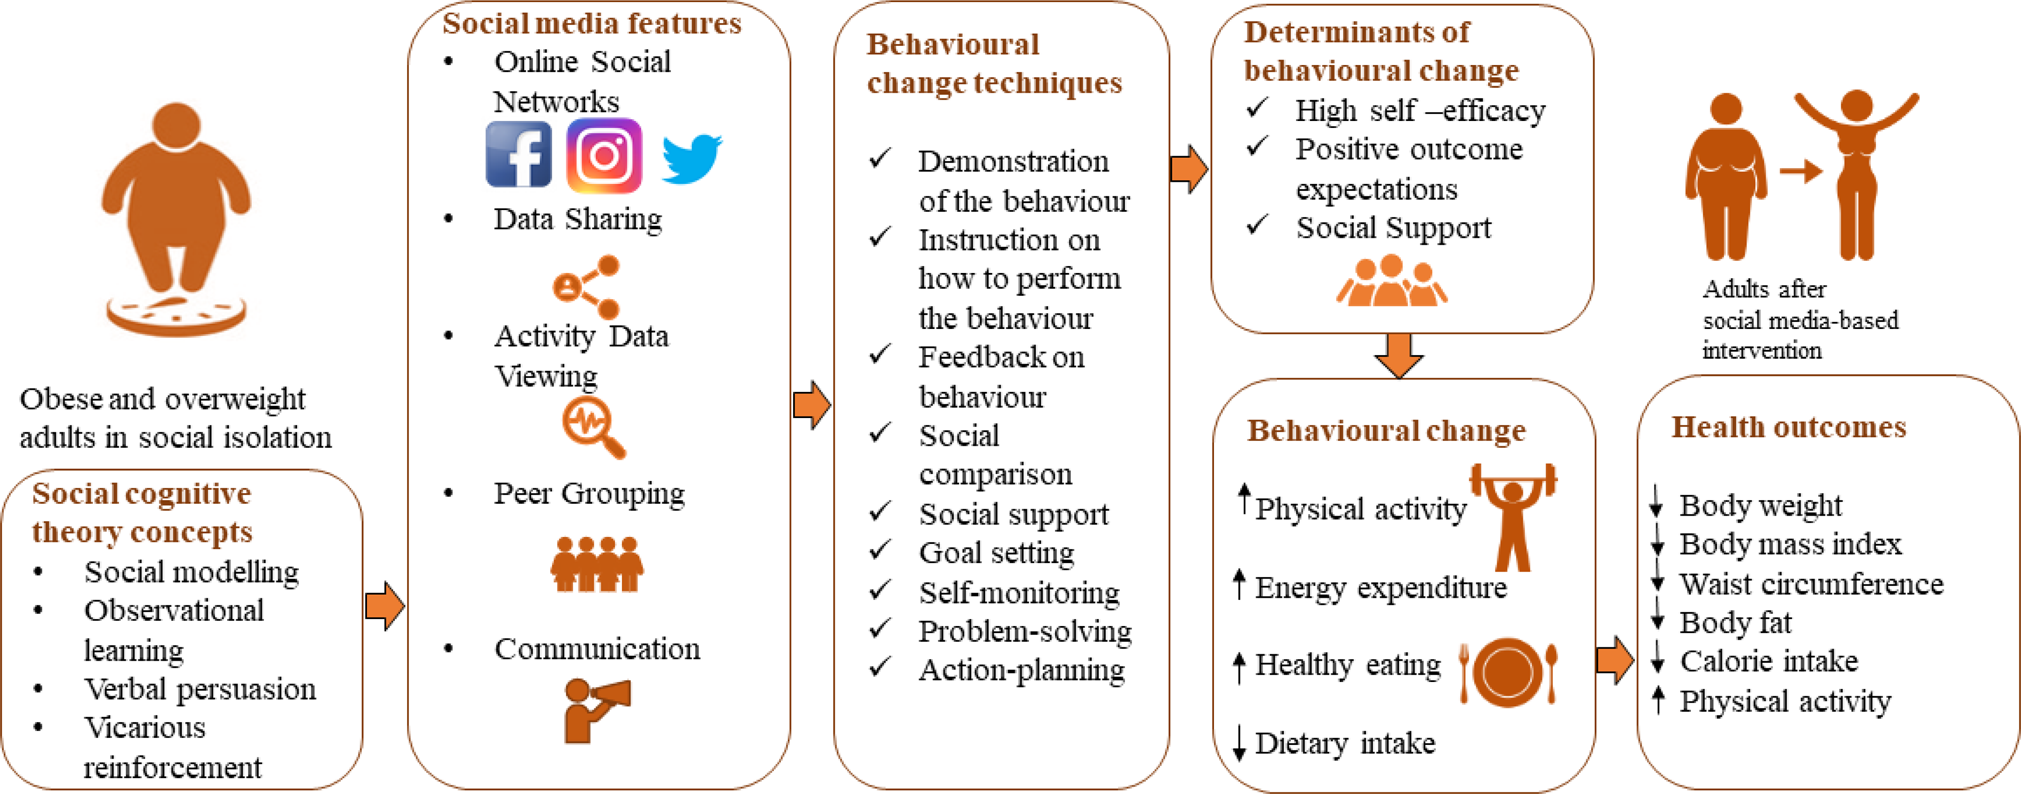 Social media-based interventions for adults with obesity and overweight: a  meta-analysis and meta-regression